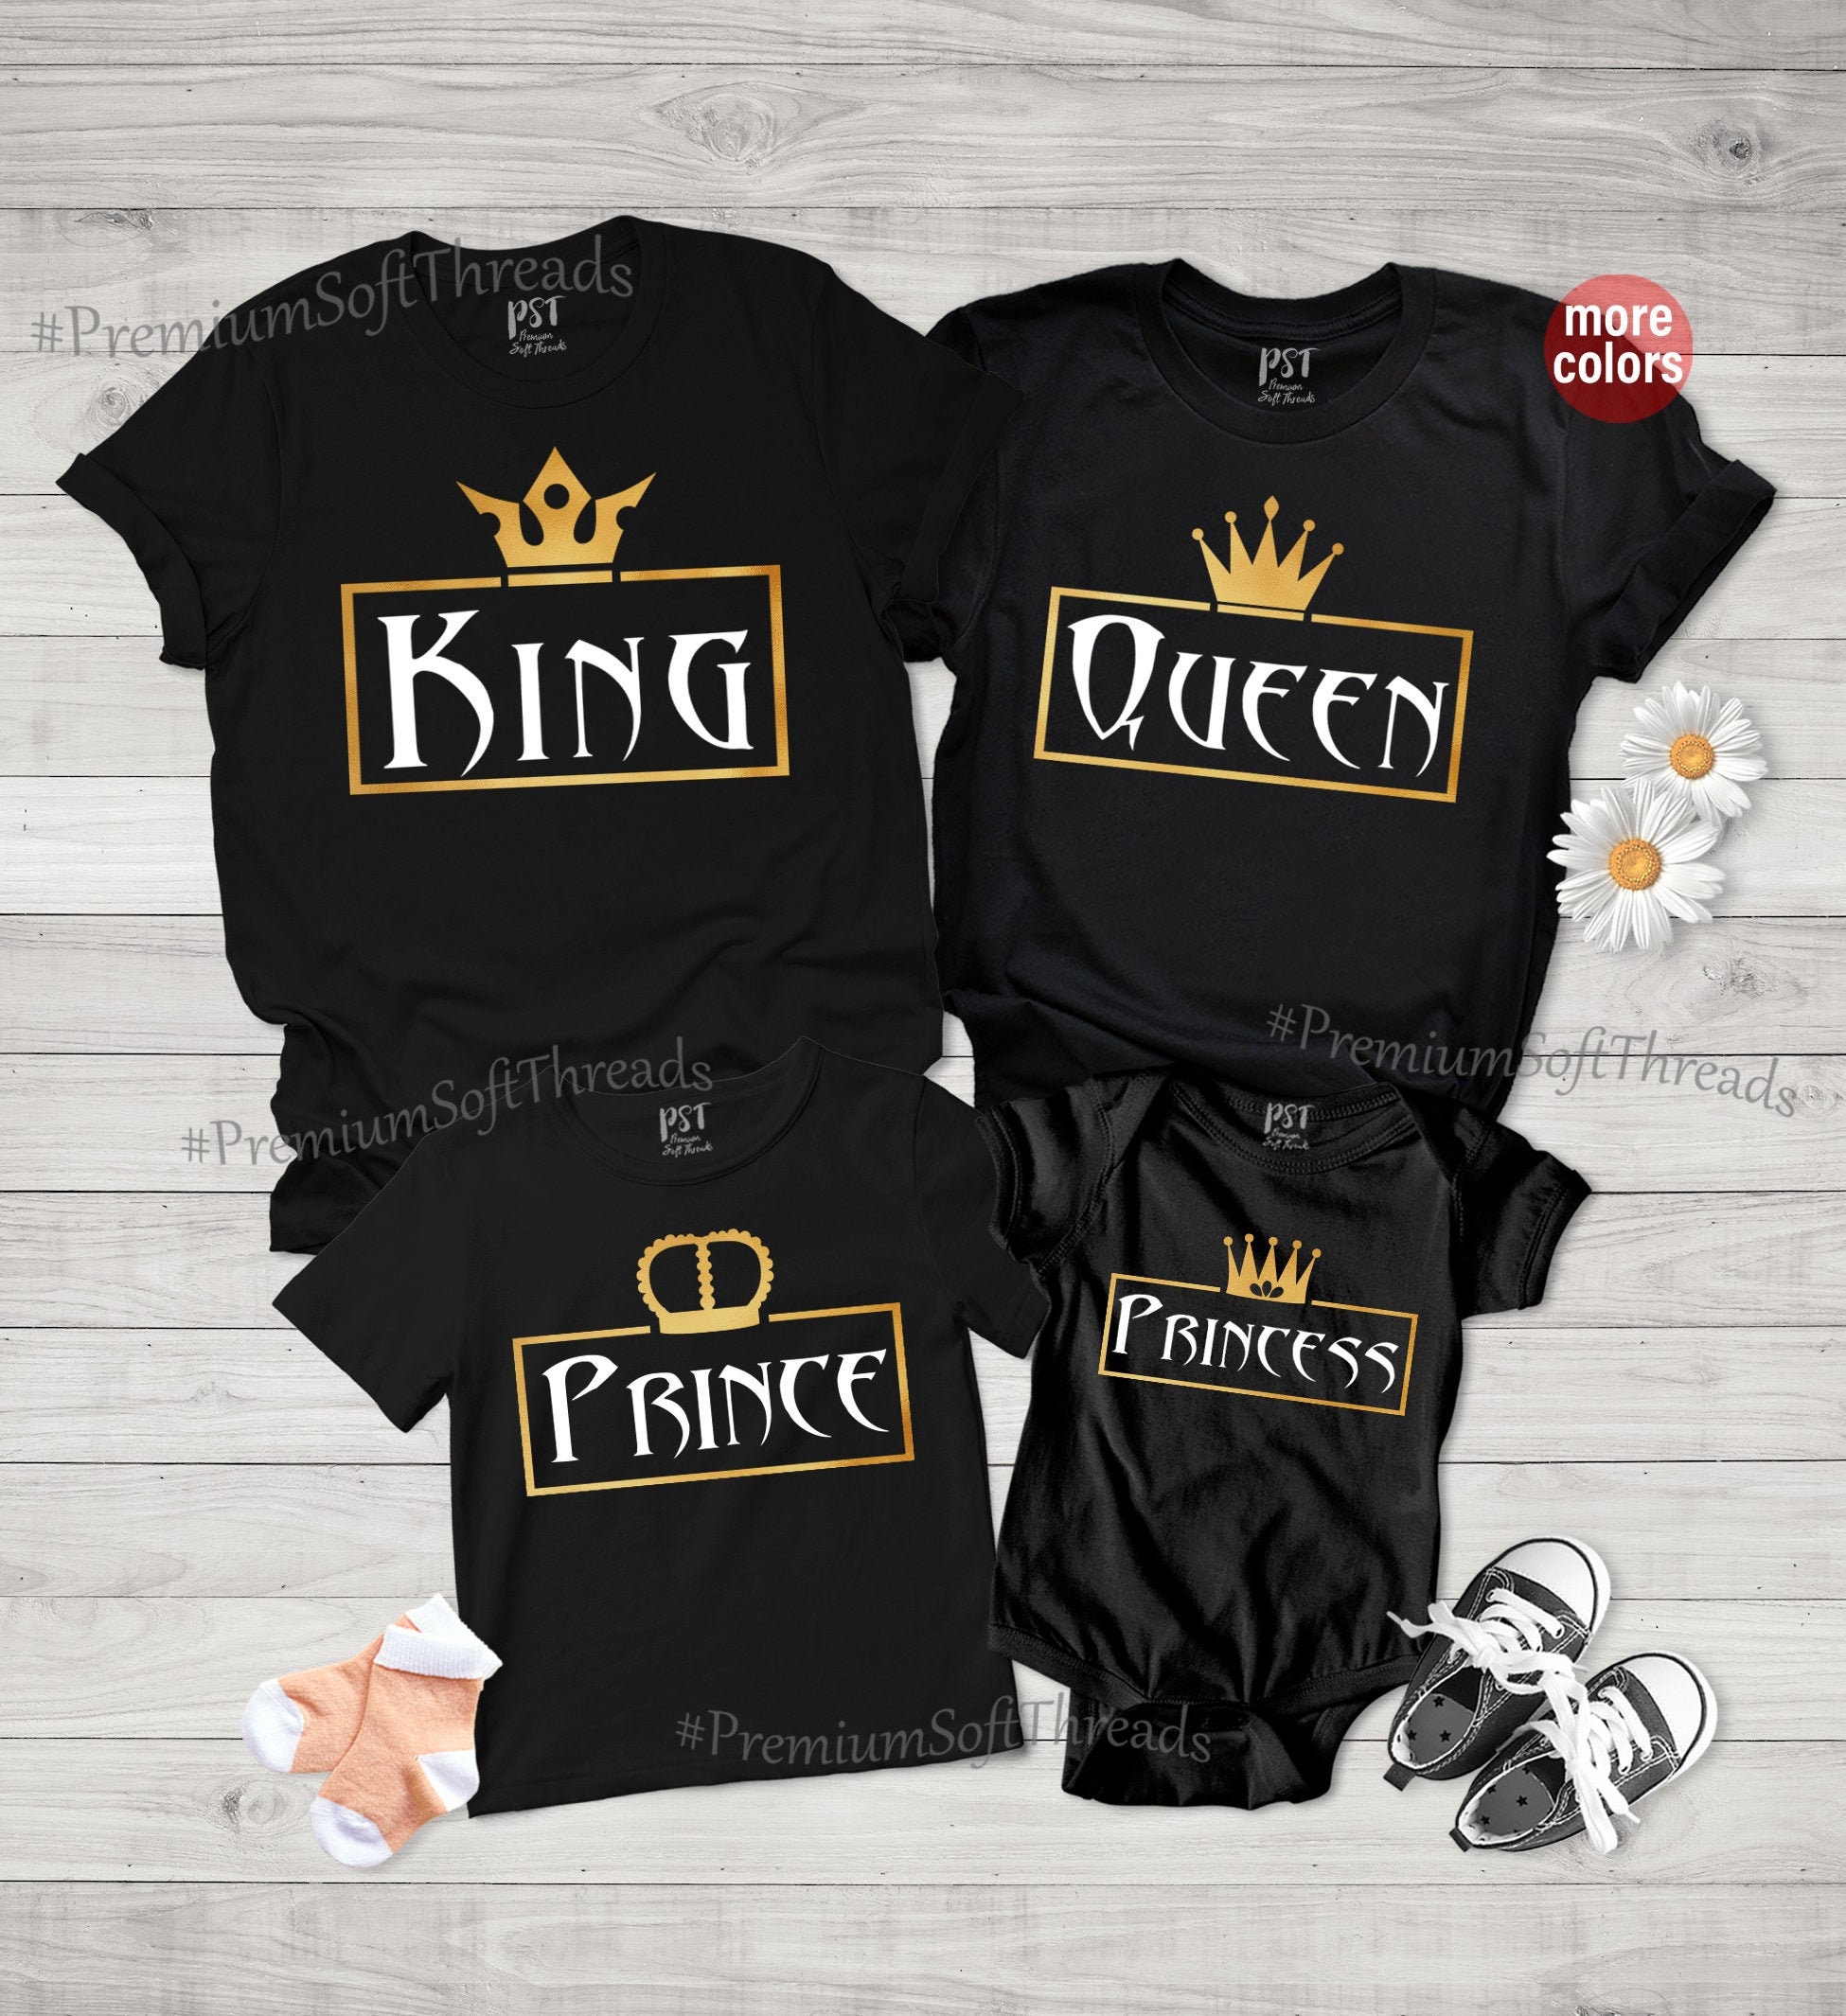 Prince and Princess T-shirts set with white text on the back Queen Family King 